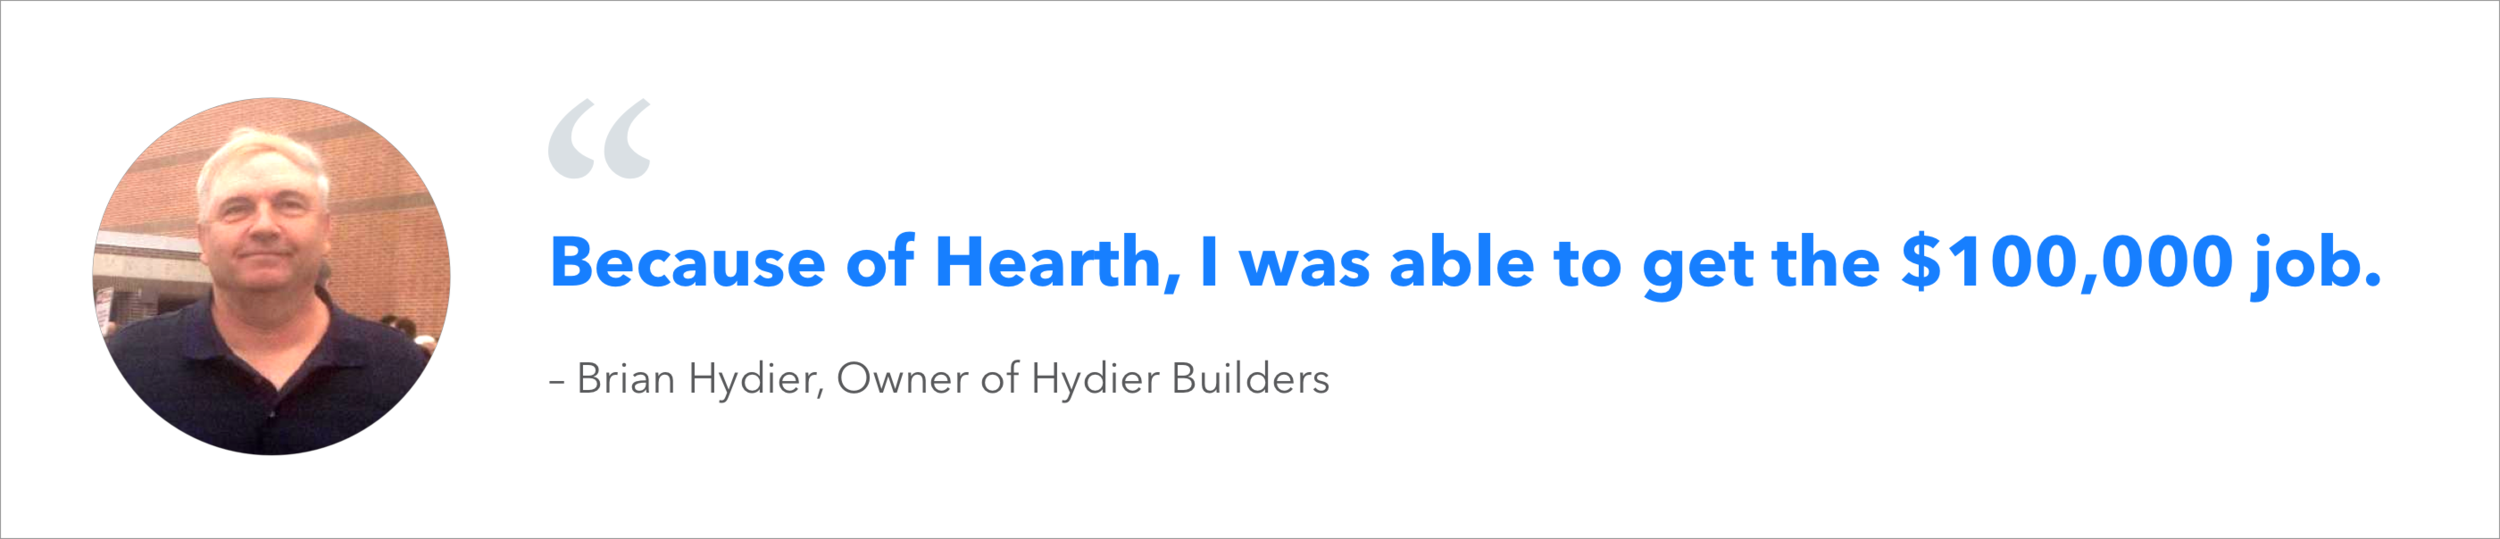 hydier quote.png